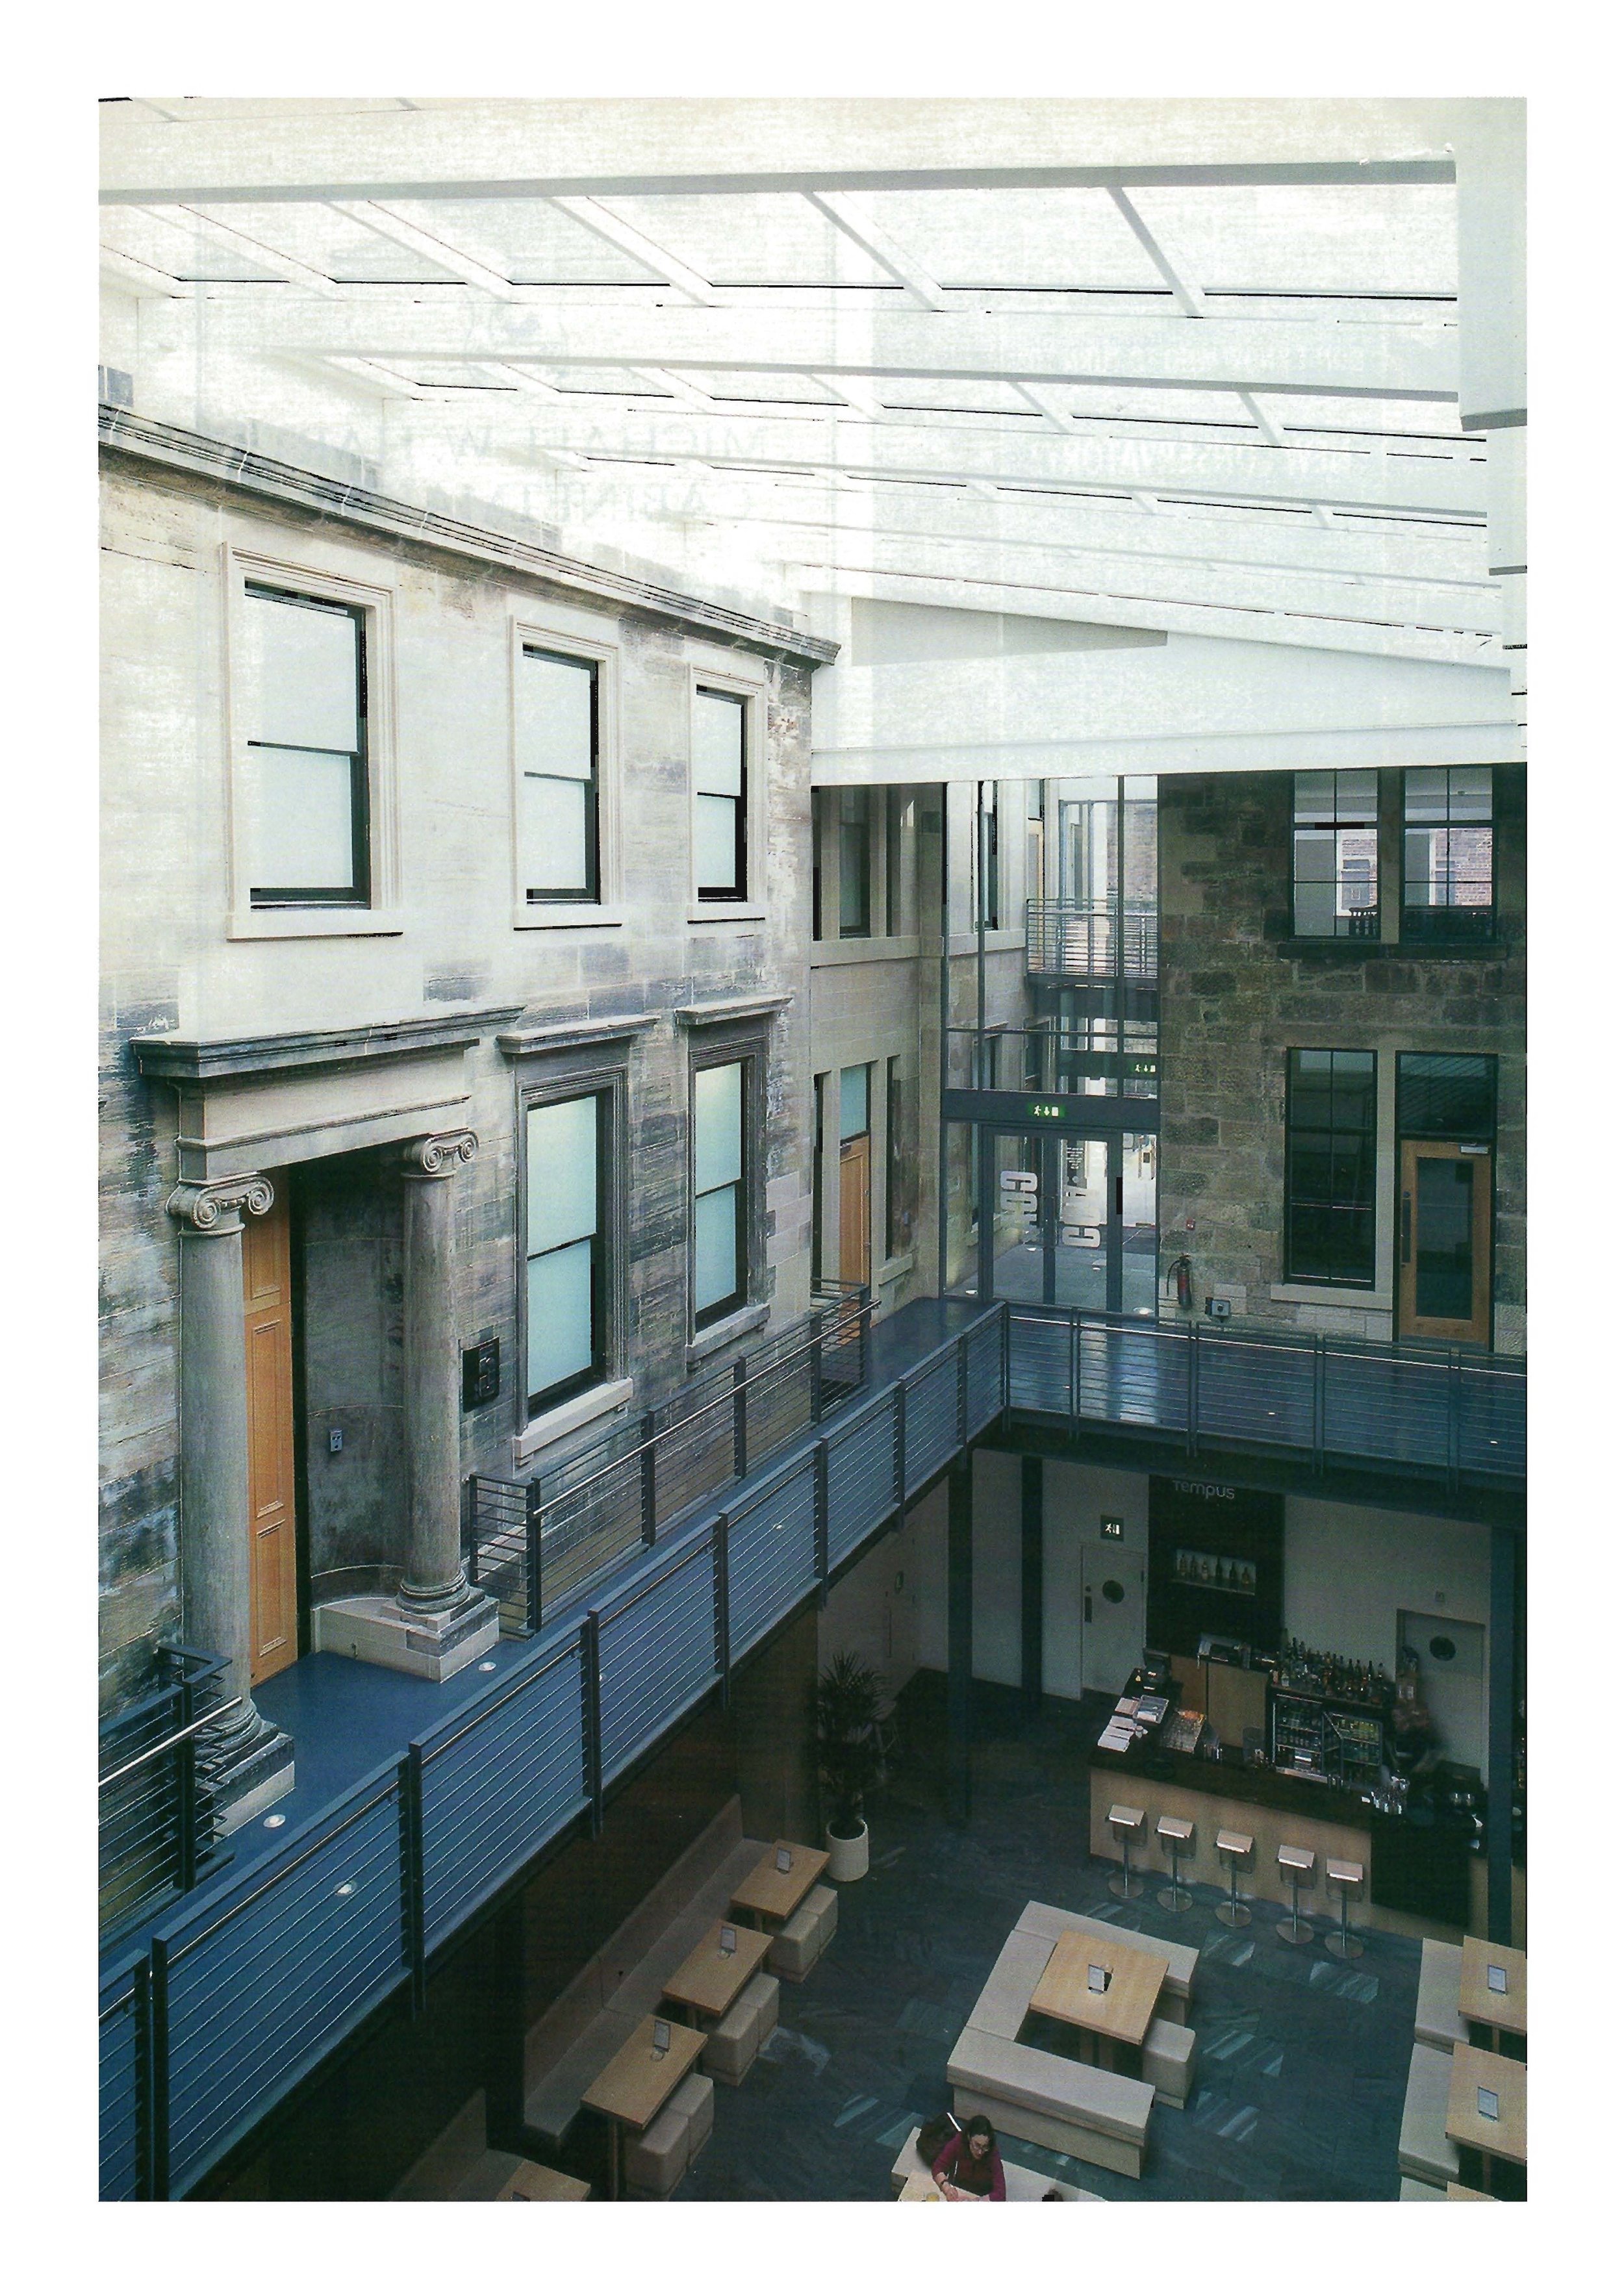 Intoxicating happenings: Glasgow Centre for Contemporary Arts